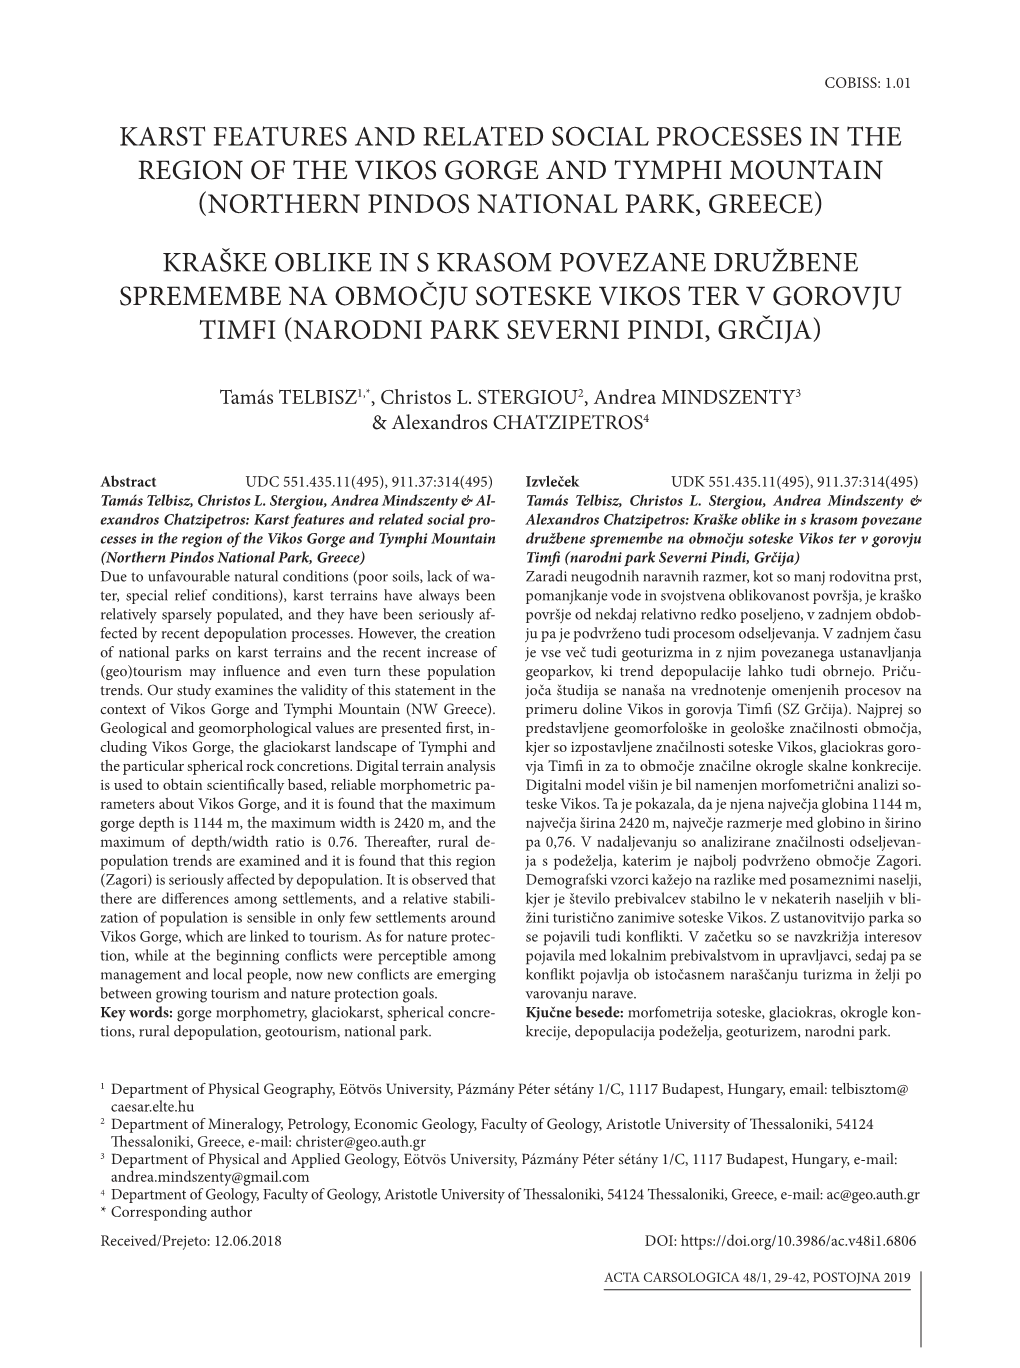 Karst Features and Related Social Processes in the Region of the Vikos Gorge and Tymphi Mountain (Northern Pindos National Park, Greece)